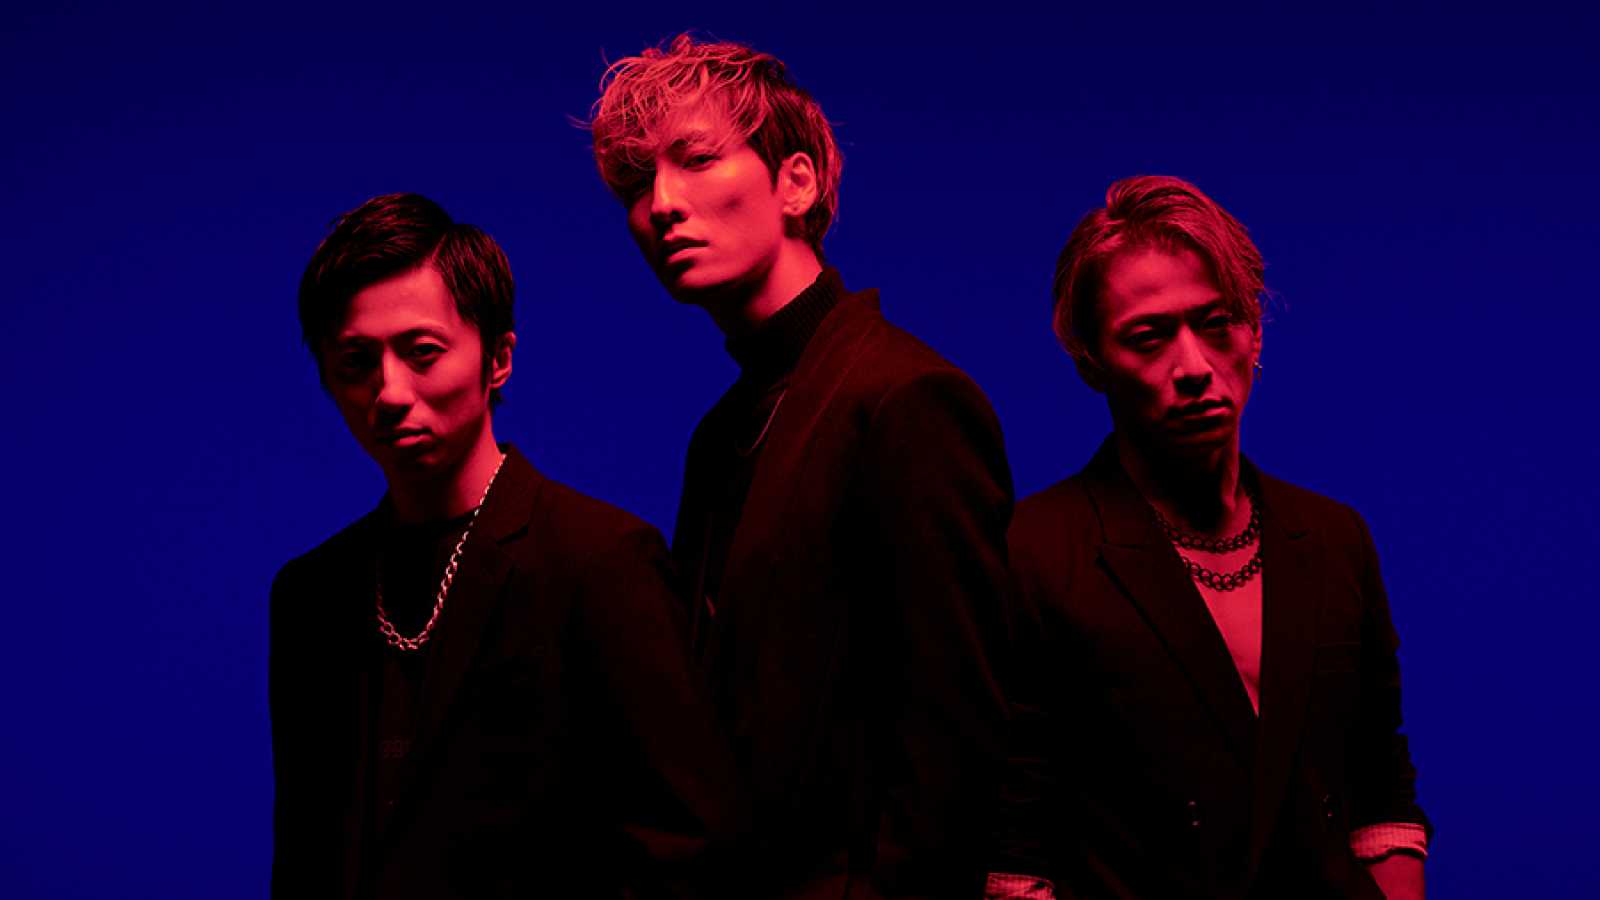 Ryuichi Ogata quitte w-inds. © PONY CANYON. All rights reserved.